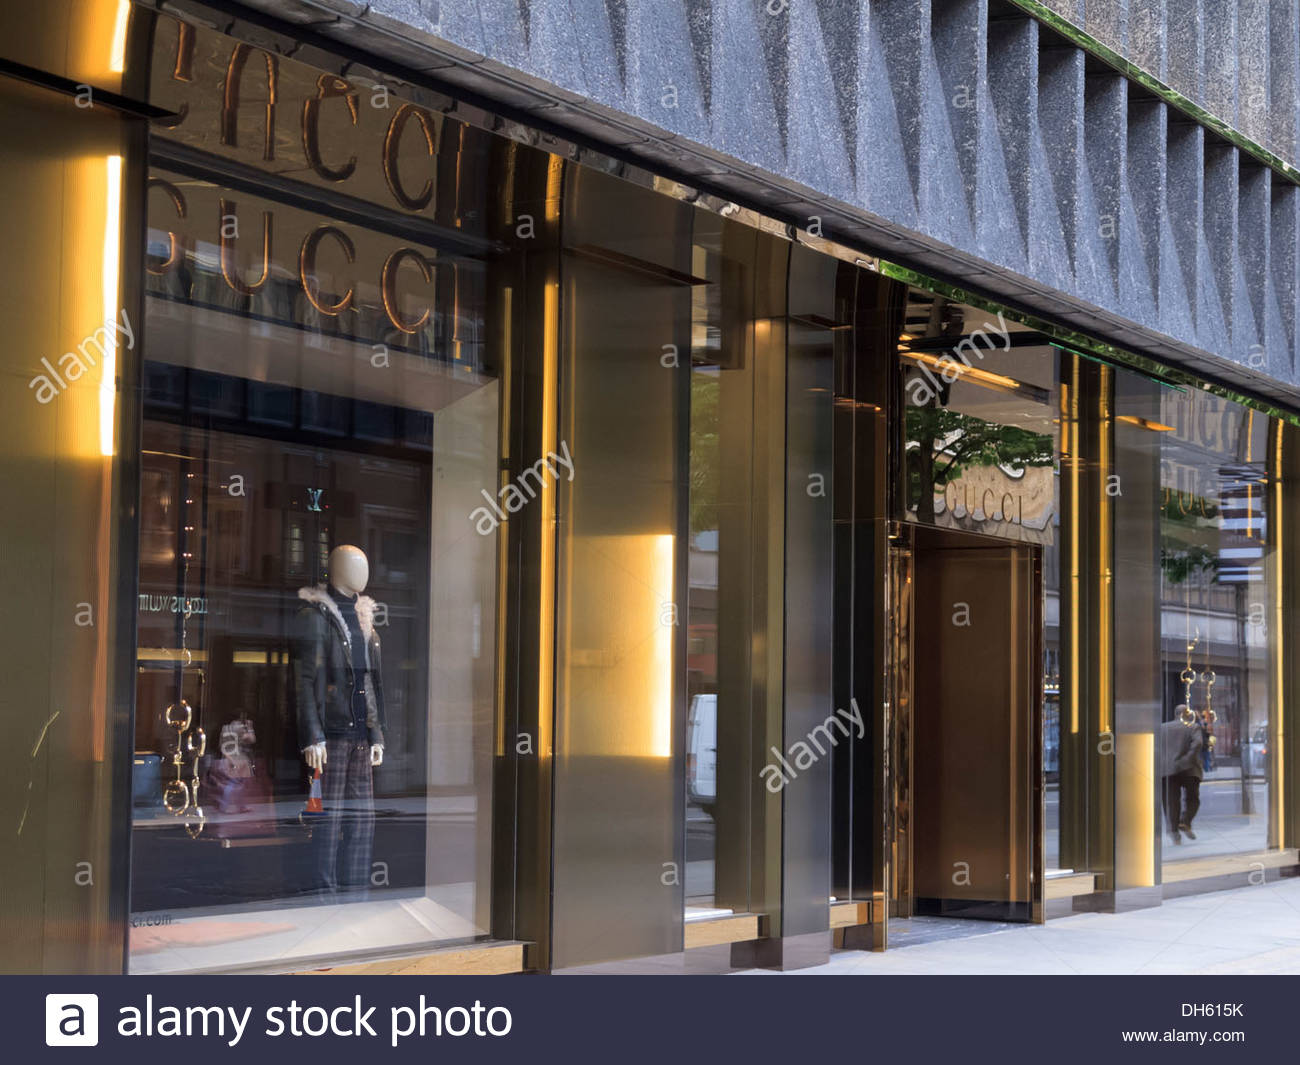 gucci sloane street opening hours